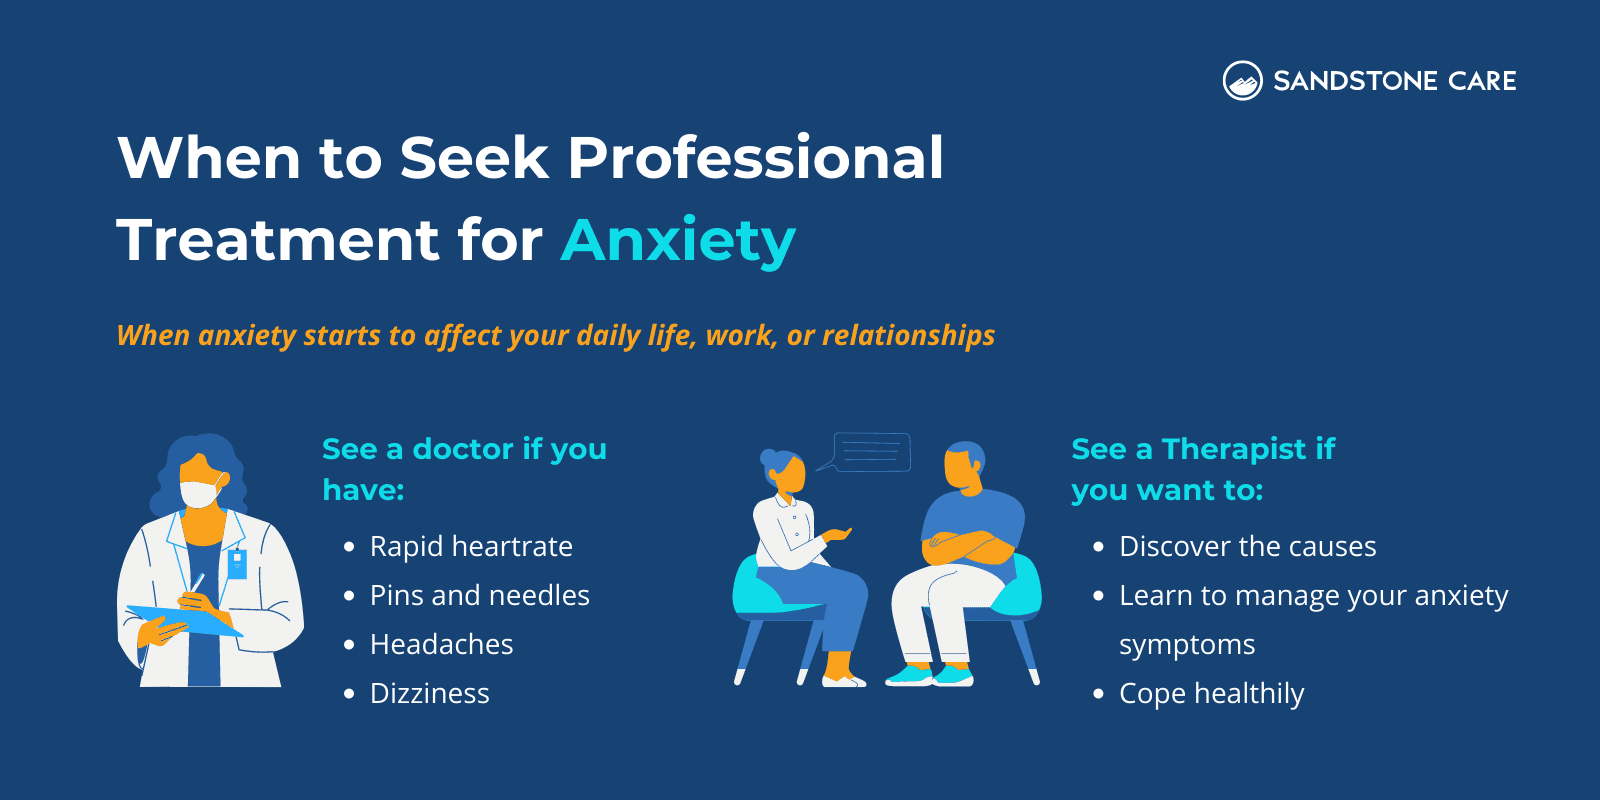 "When To Seek Professional Treatment For Anxiety" Illustrated with relevant graphics and information